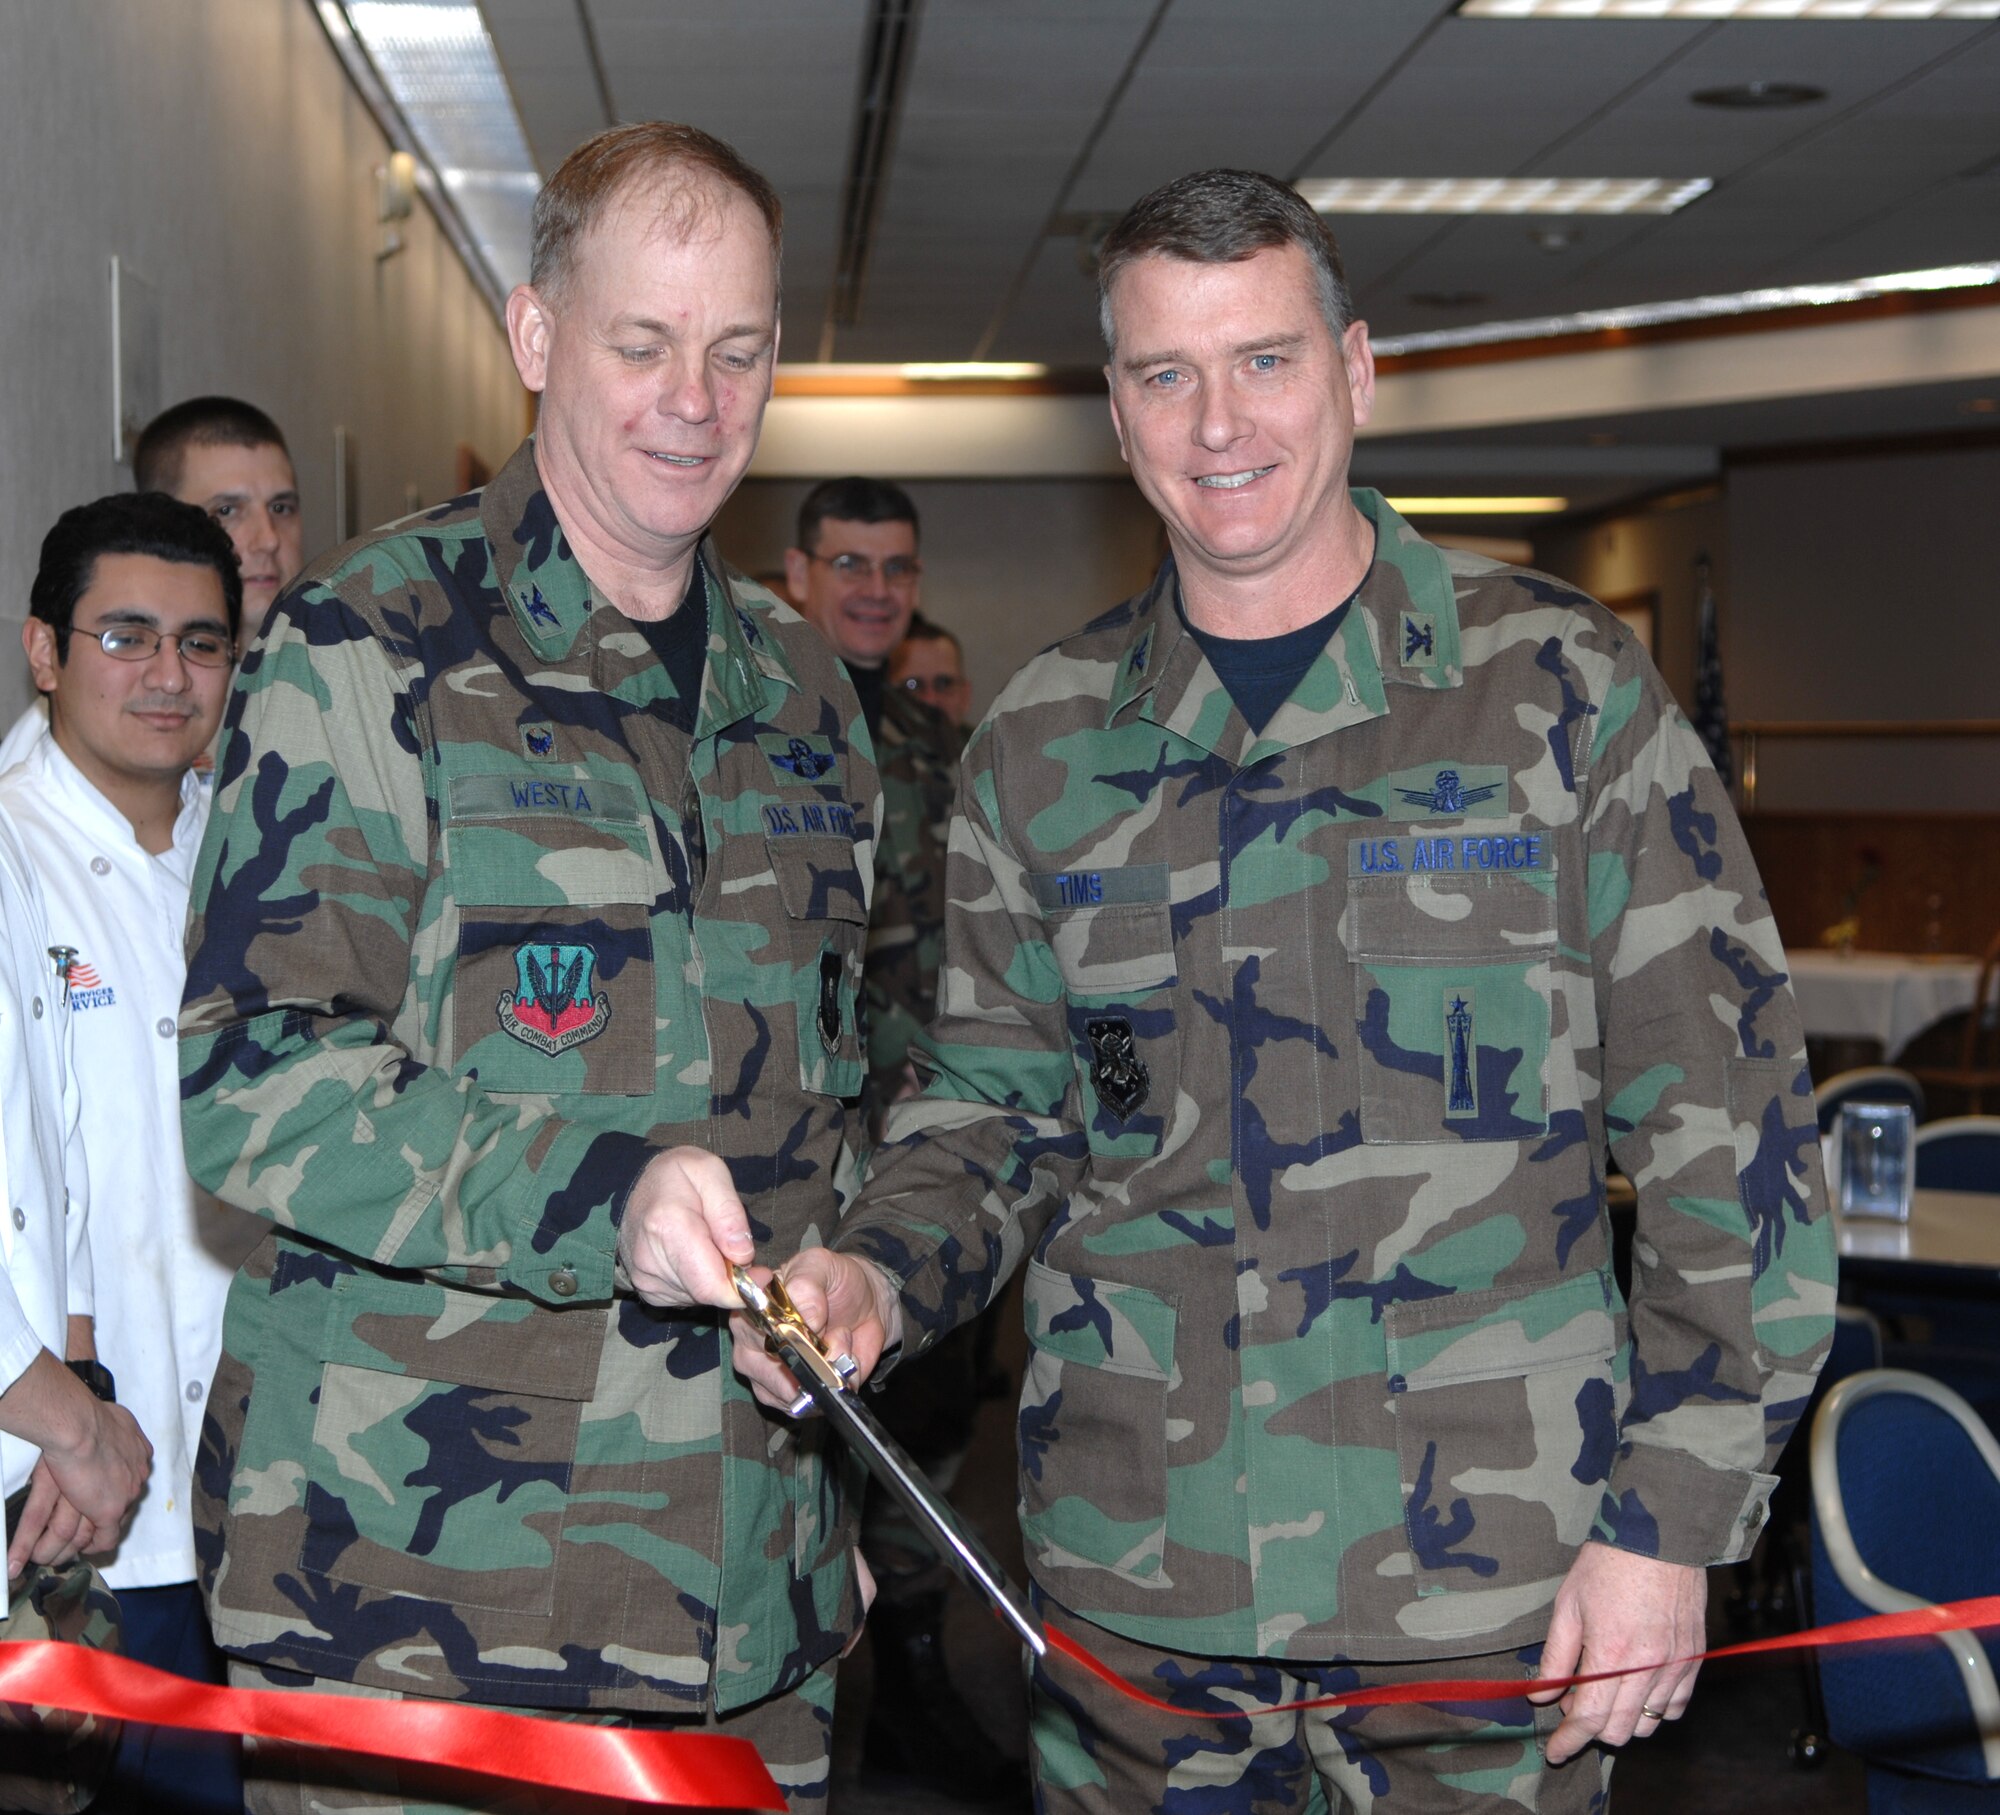 MINOT AIR FORCE BASE, N.D. -- Col. Joel Westa (right), 5th Bomb Wing commander, and Col. Greg Tims, 91st Space Wing vice commander, cut a ribbon to officially open the new cyber cafe at the Dakota Inn Dining Facility here Jan. 9. (U.S. Air Force photo by Senior Airman Stacey Moless)